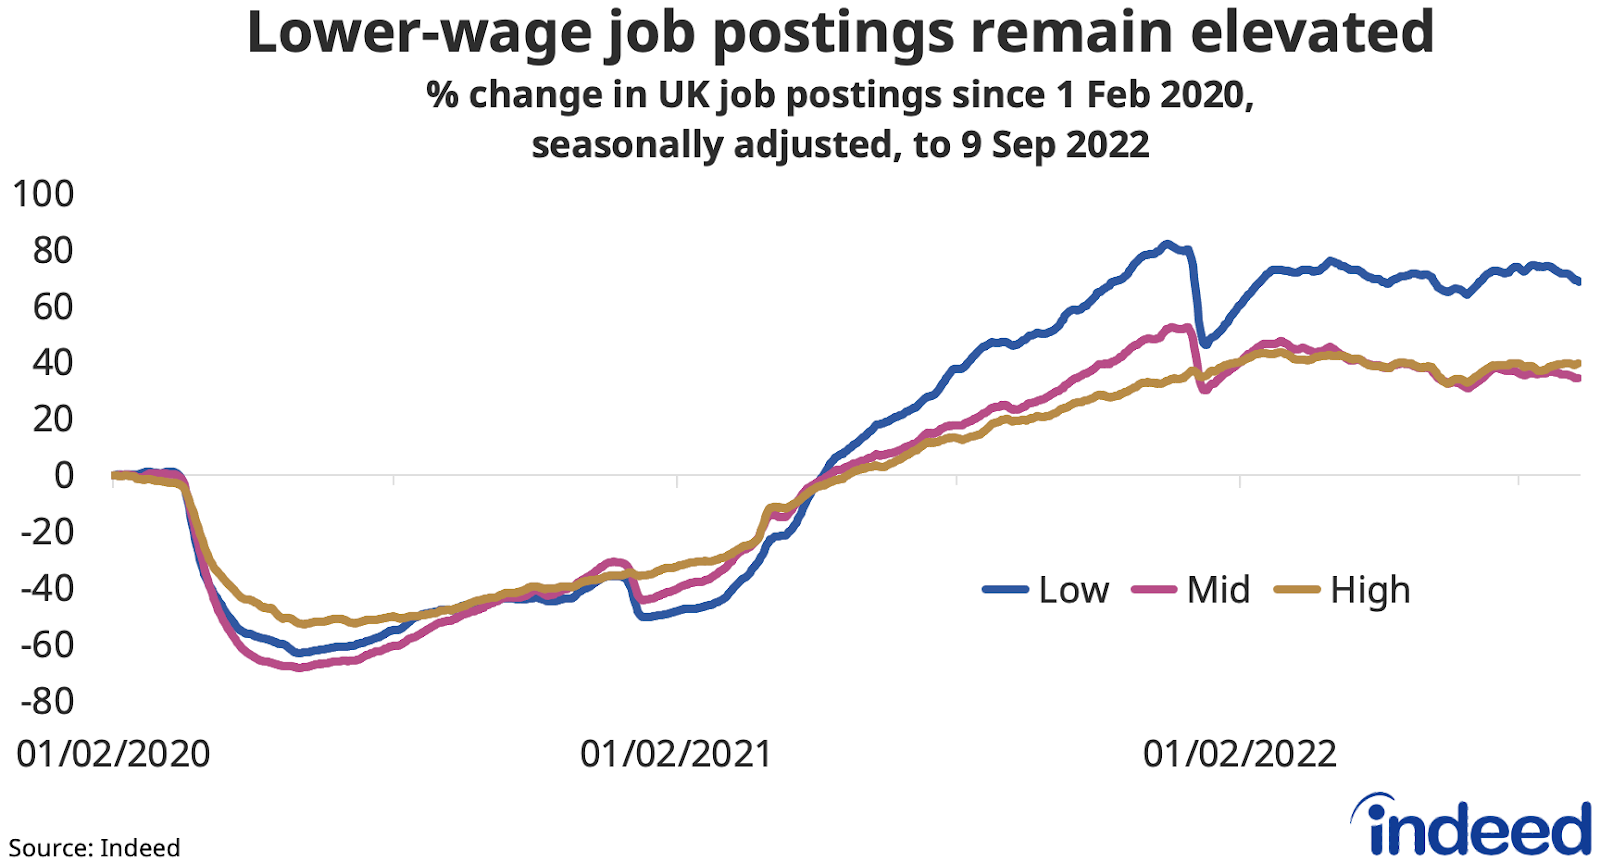 Line chart showing the job postings trend from 1 February 2020 to 9 September 2022 across low, mid and high-wage tiers.